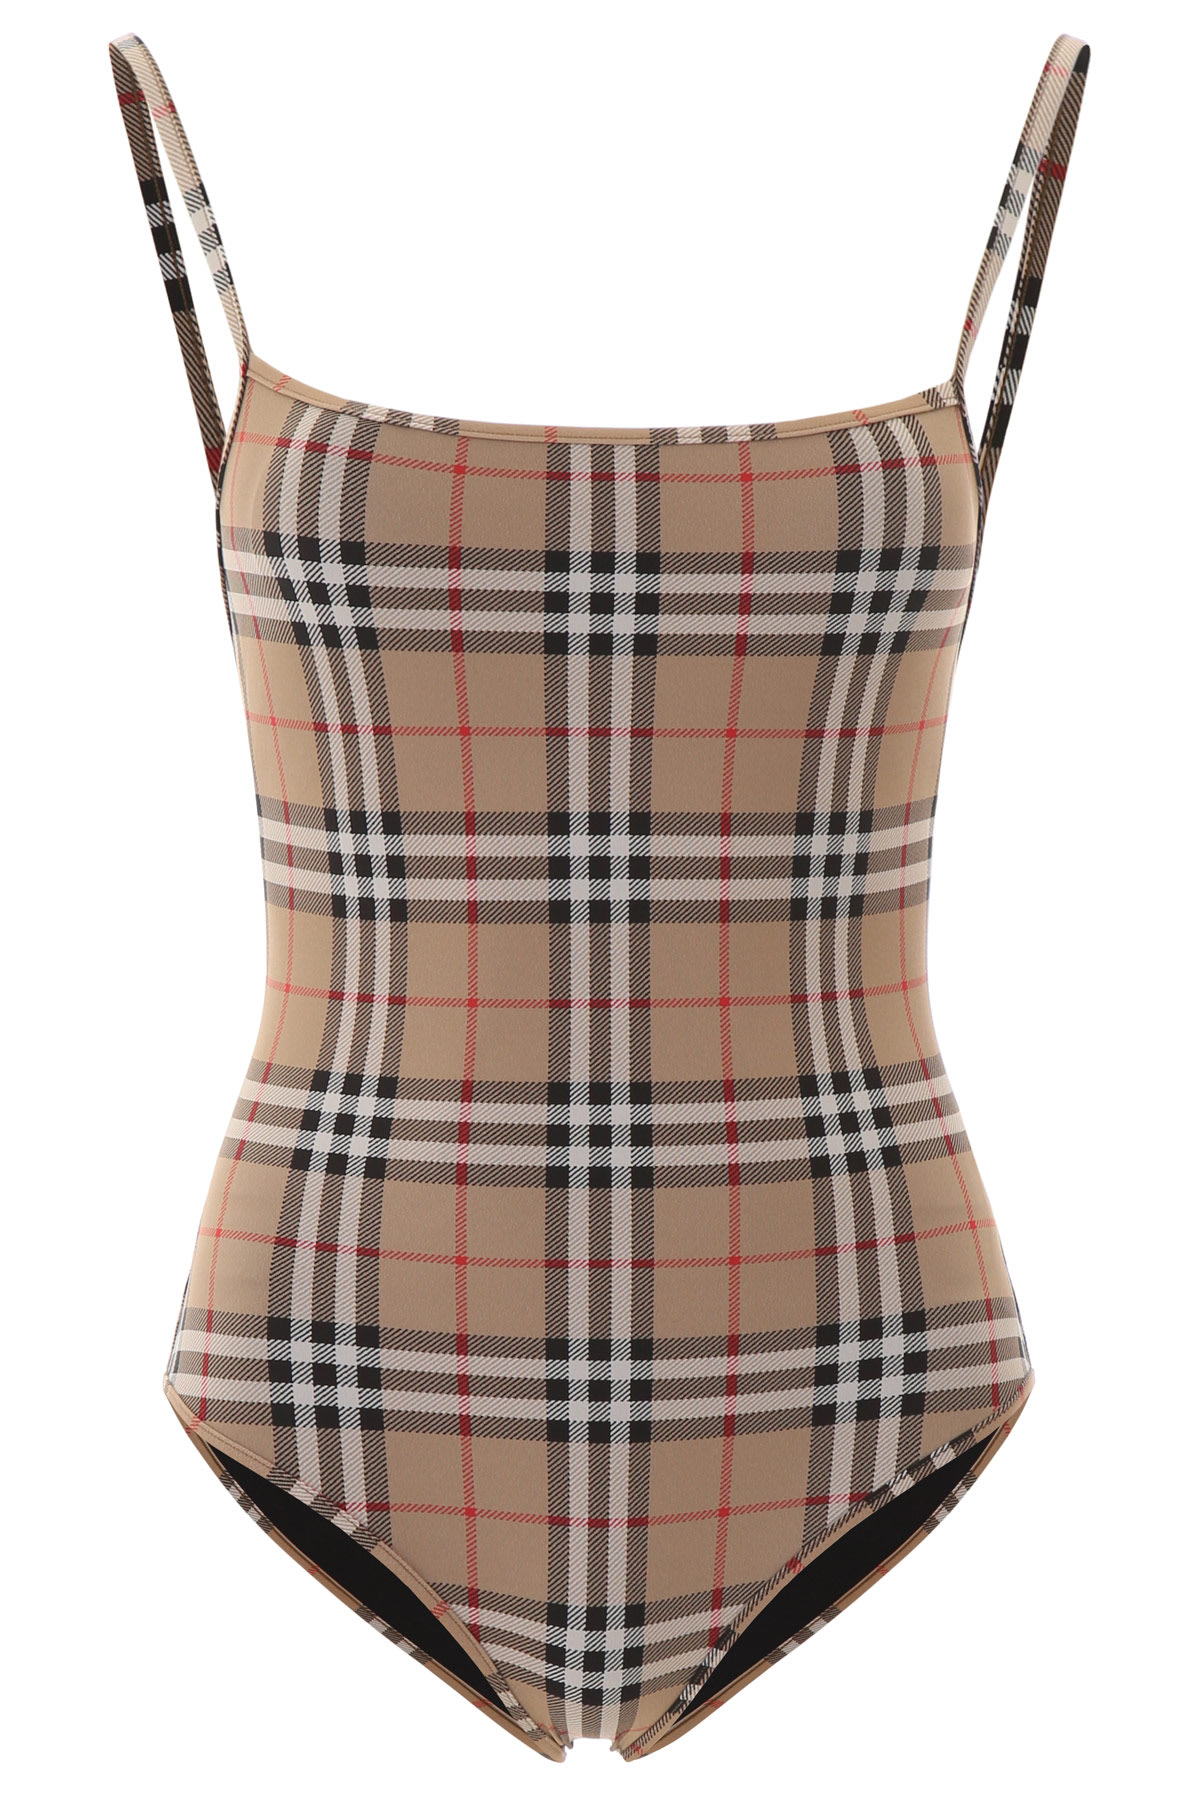 burberry bathing suit one piece